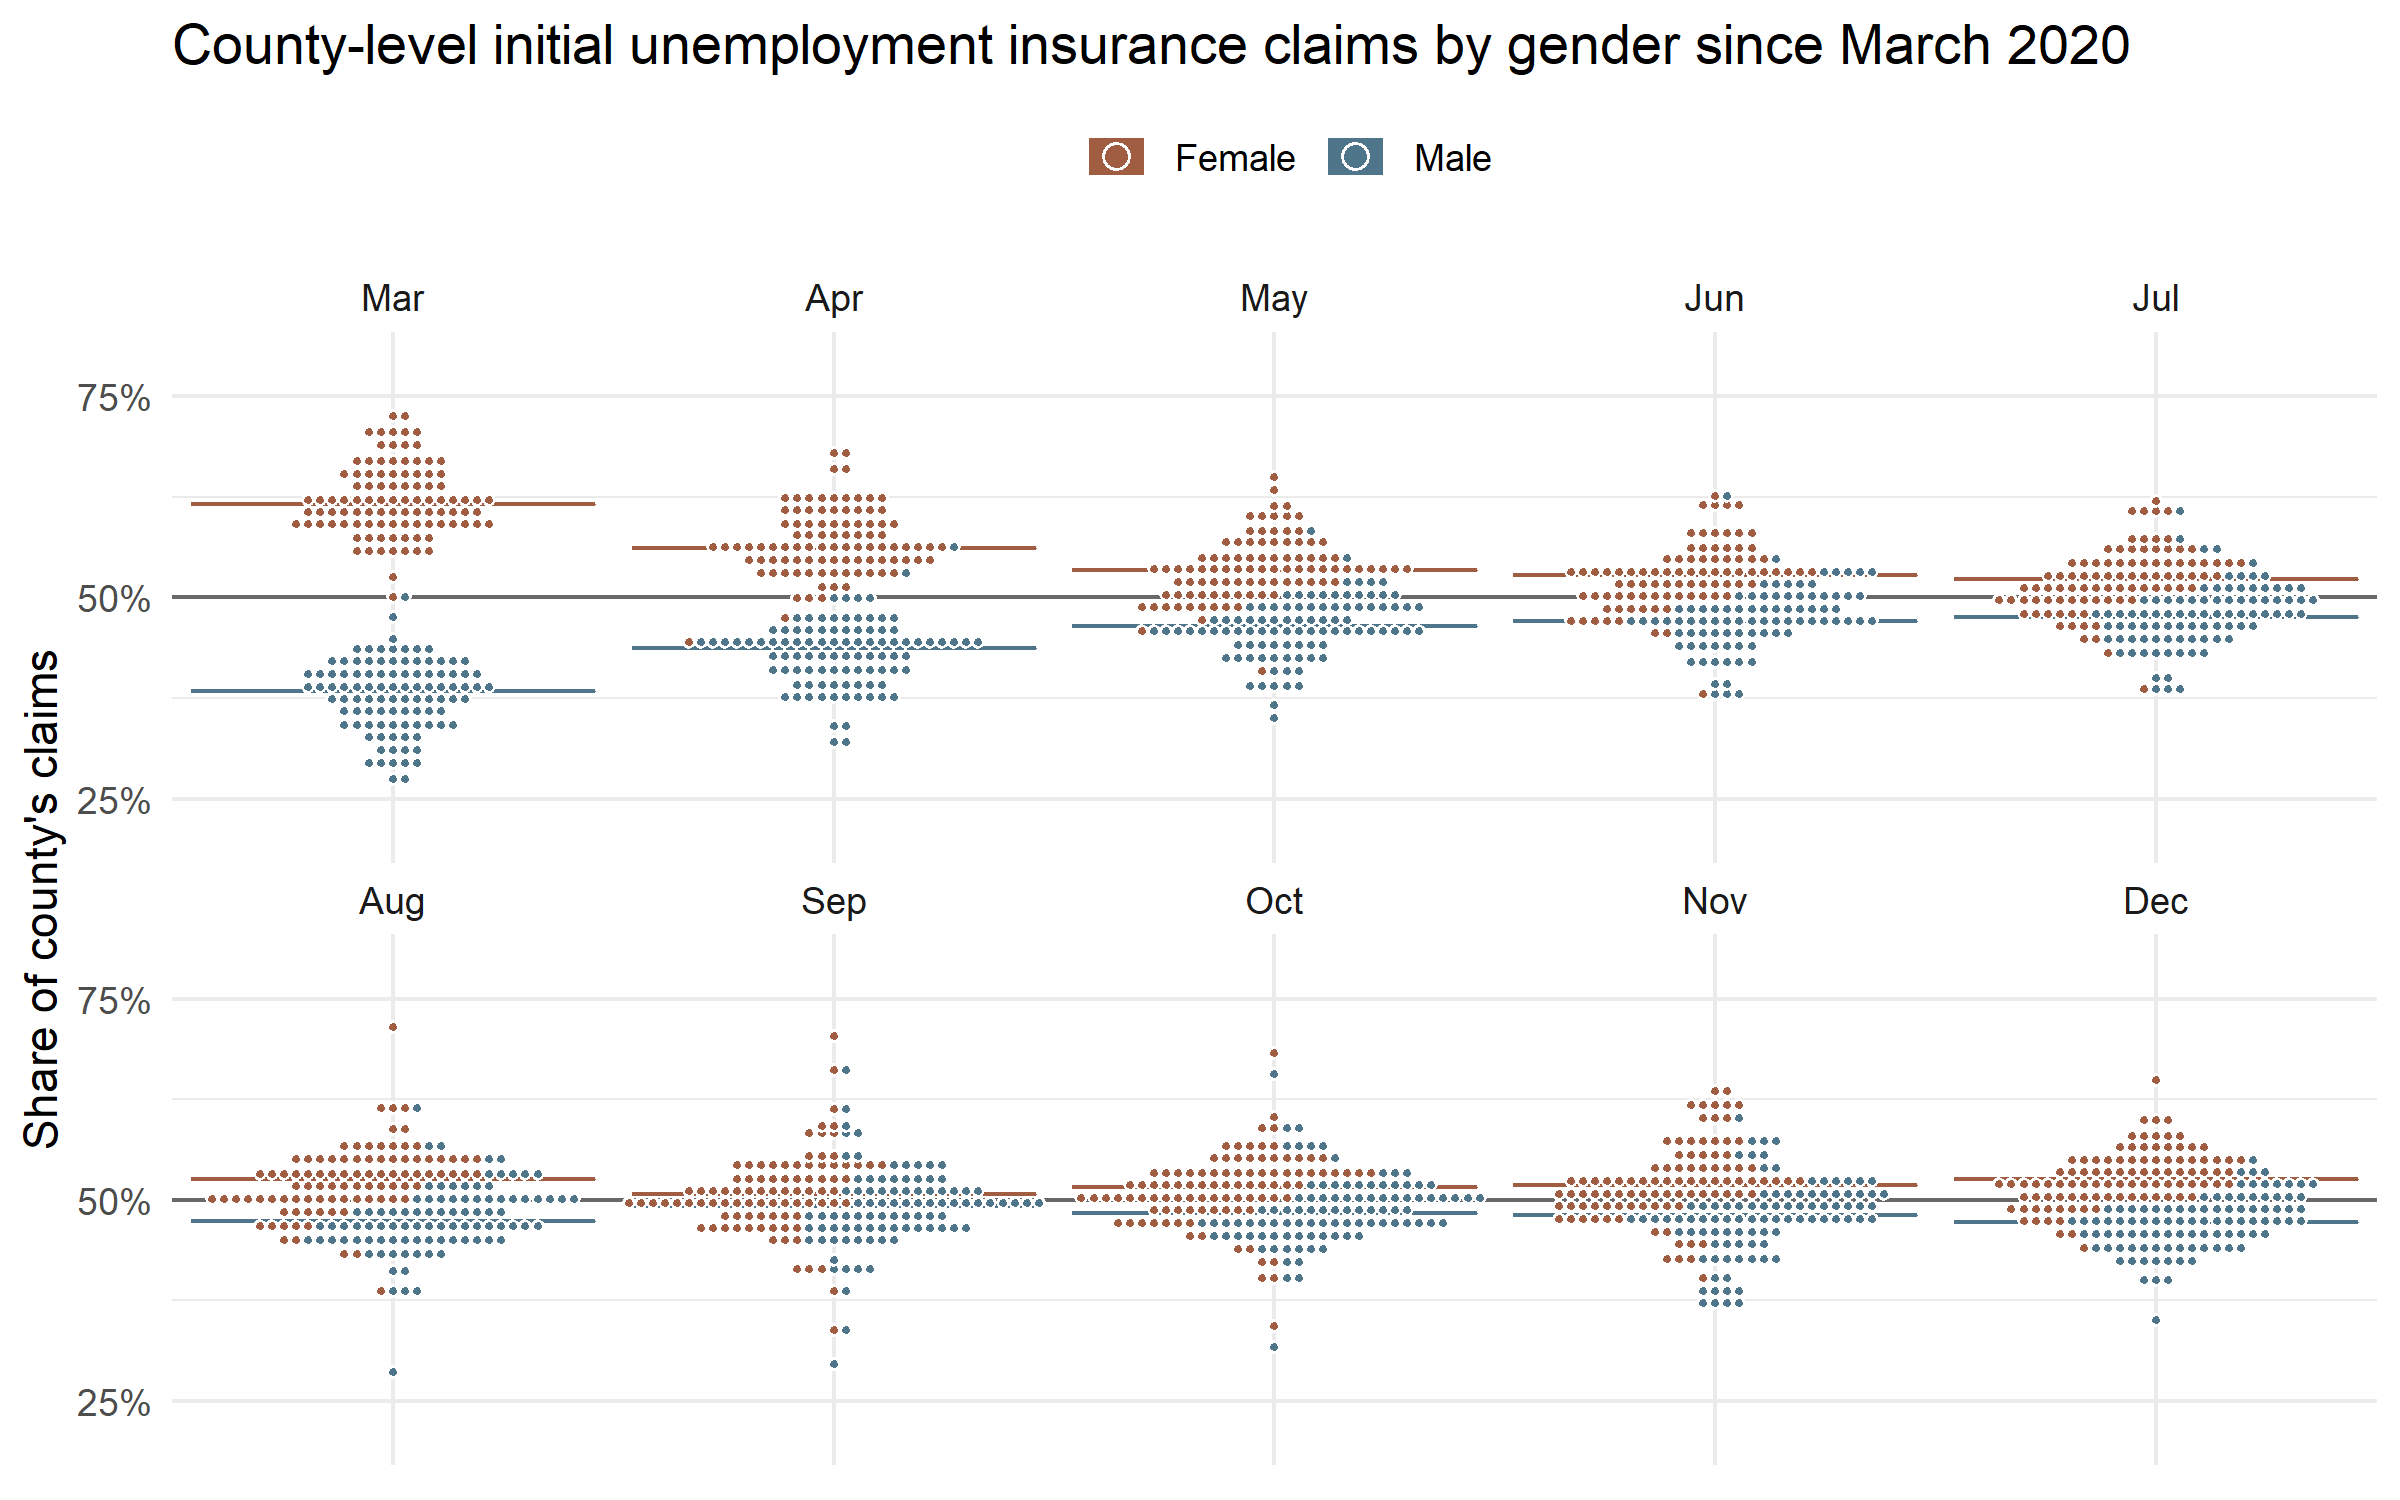 Figure 1: Distribution of Initial Unemployment Insurance Claims by Gender Since March 2020. This image is a series of eight charts, representing the months of March through October in 2020. It plots initial unemployment insurance claims by male and female filers. On each of the charts, there are clusters of blue and brown dots representing male and female unemployment insurance filers, respectively. The x axis denotes each month, and the y-axis represents the gender category's total share of claims for each county.